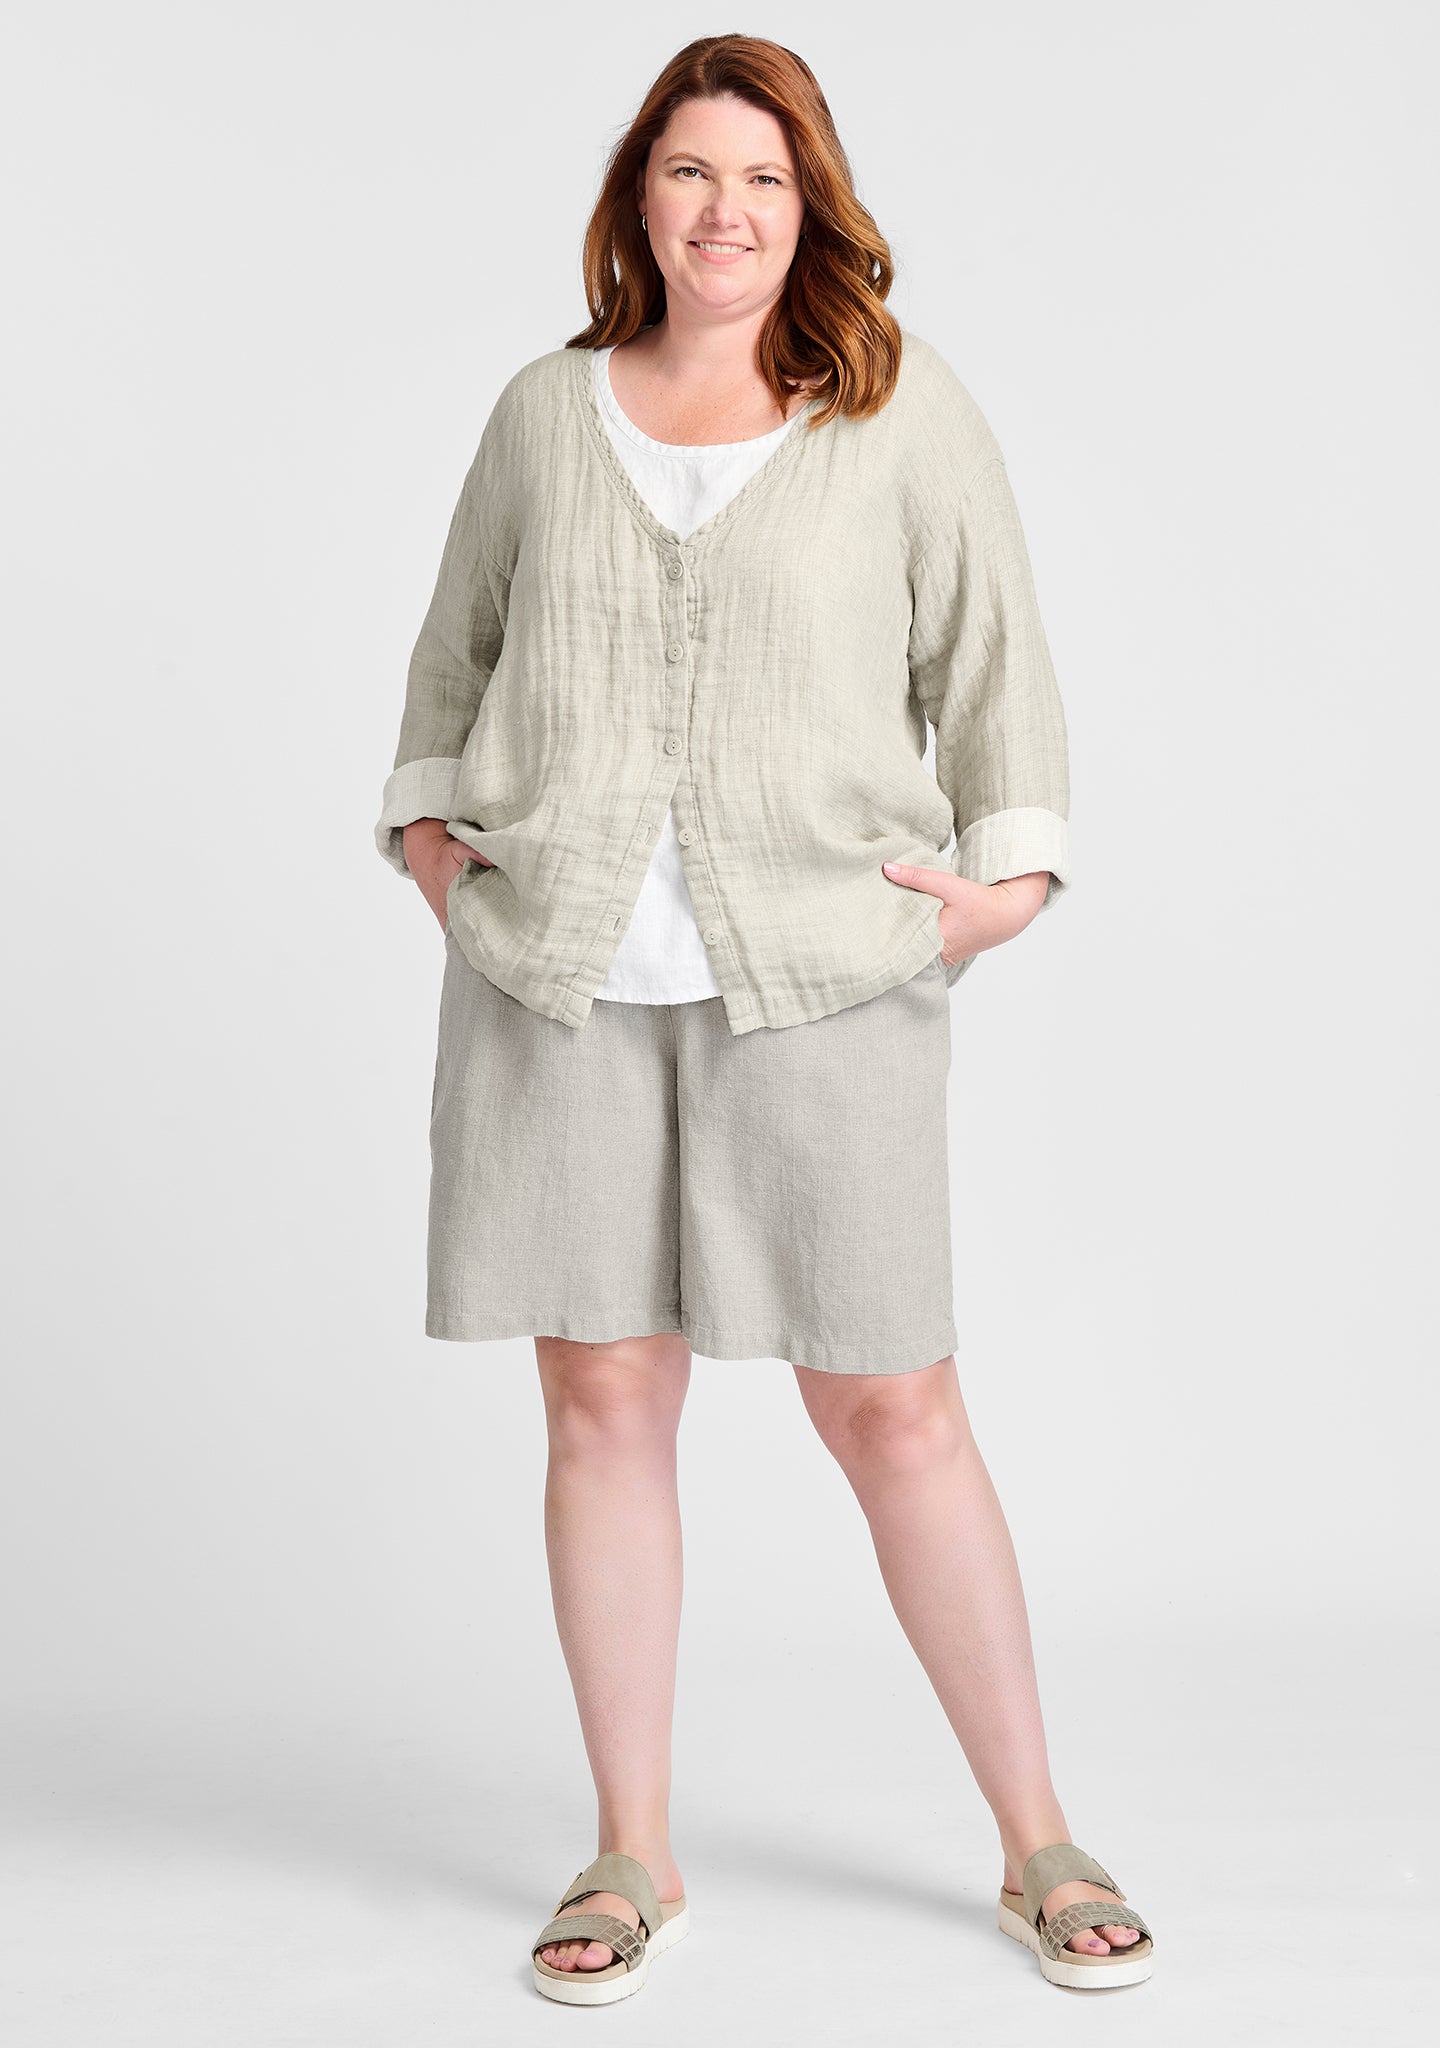 FLAX linen jacket in natural with linen tank in white and linen shorts in natural